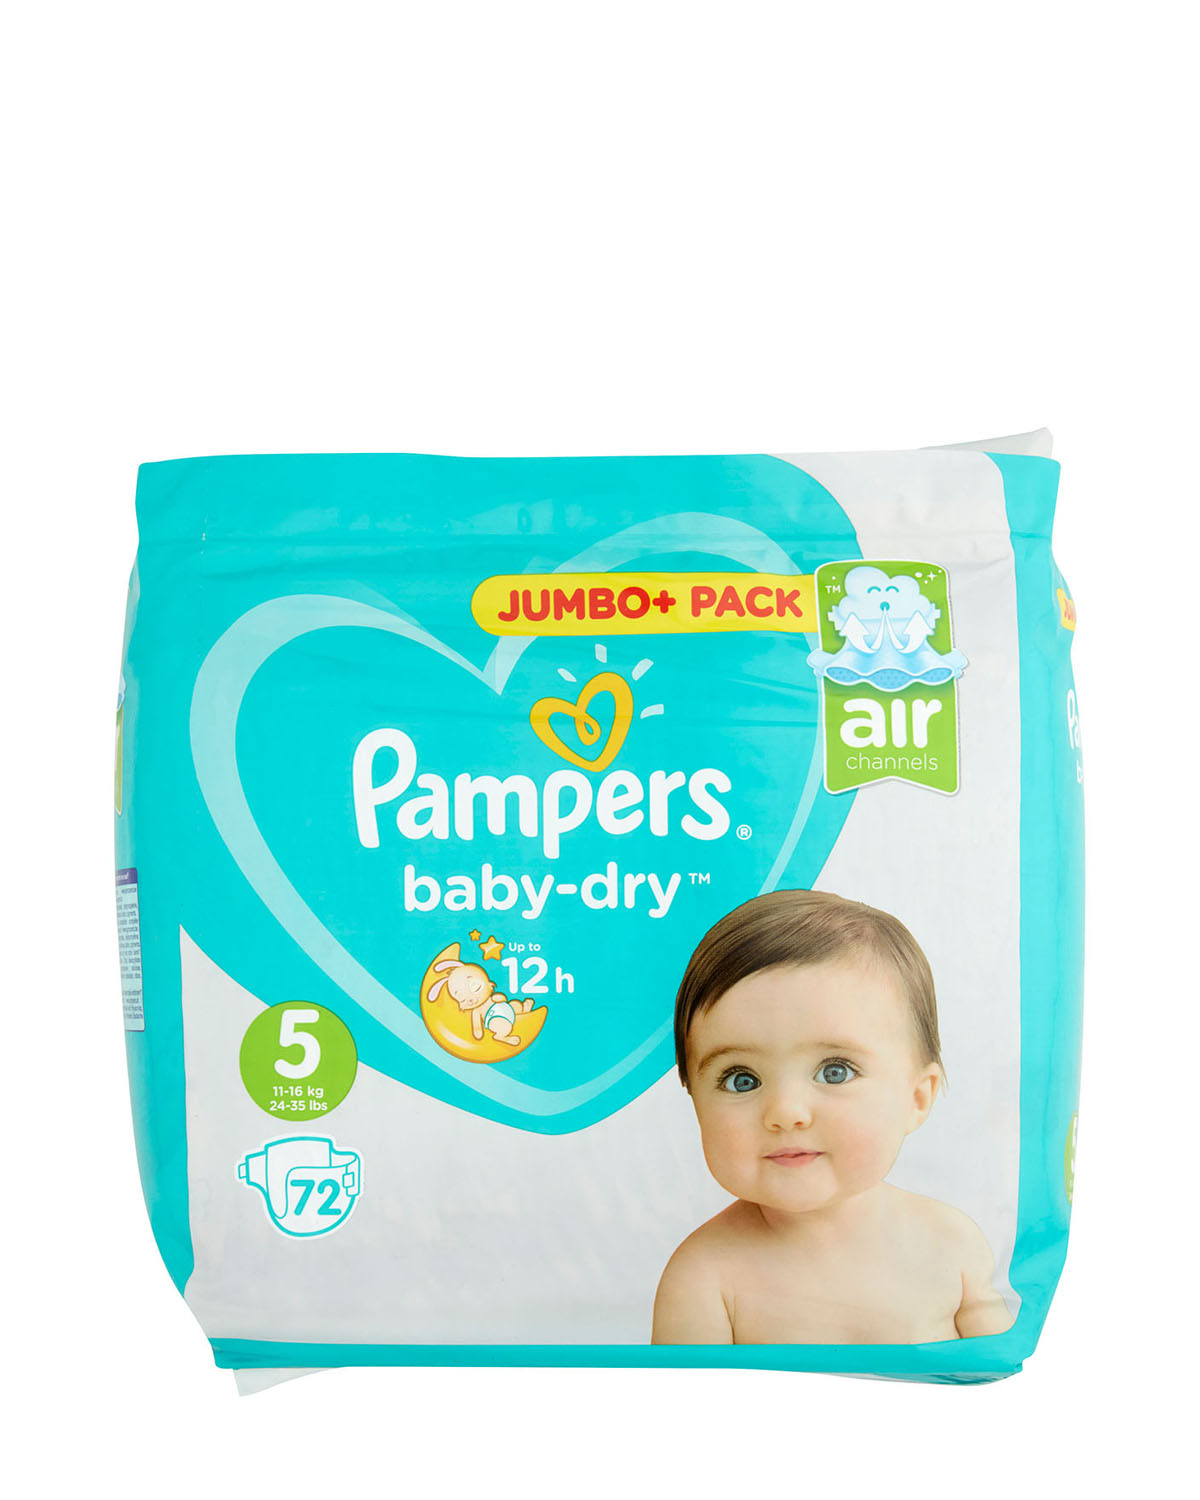 Pampers Baby Dry Jumbo Plus Size: 5 - 72 Nappies